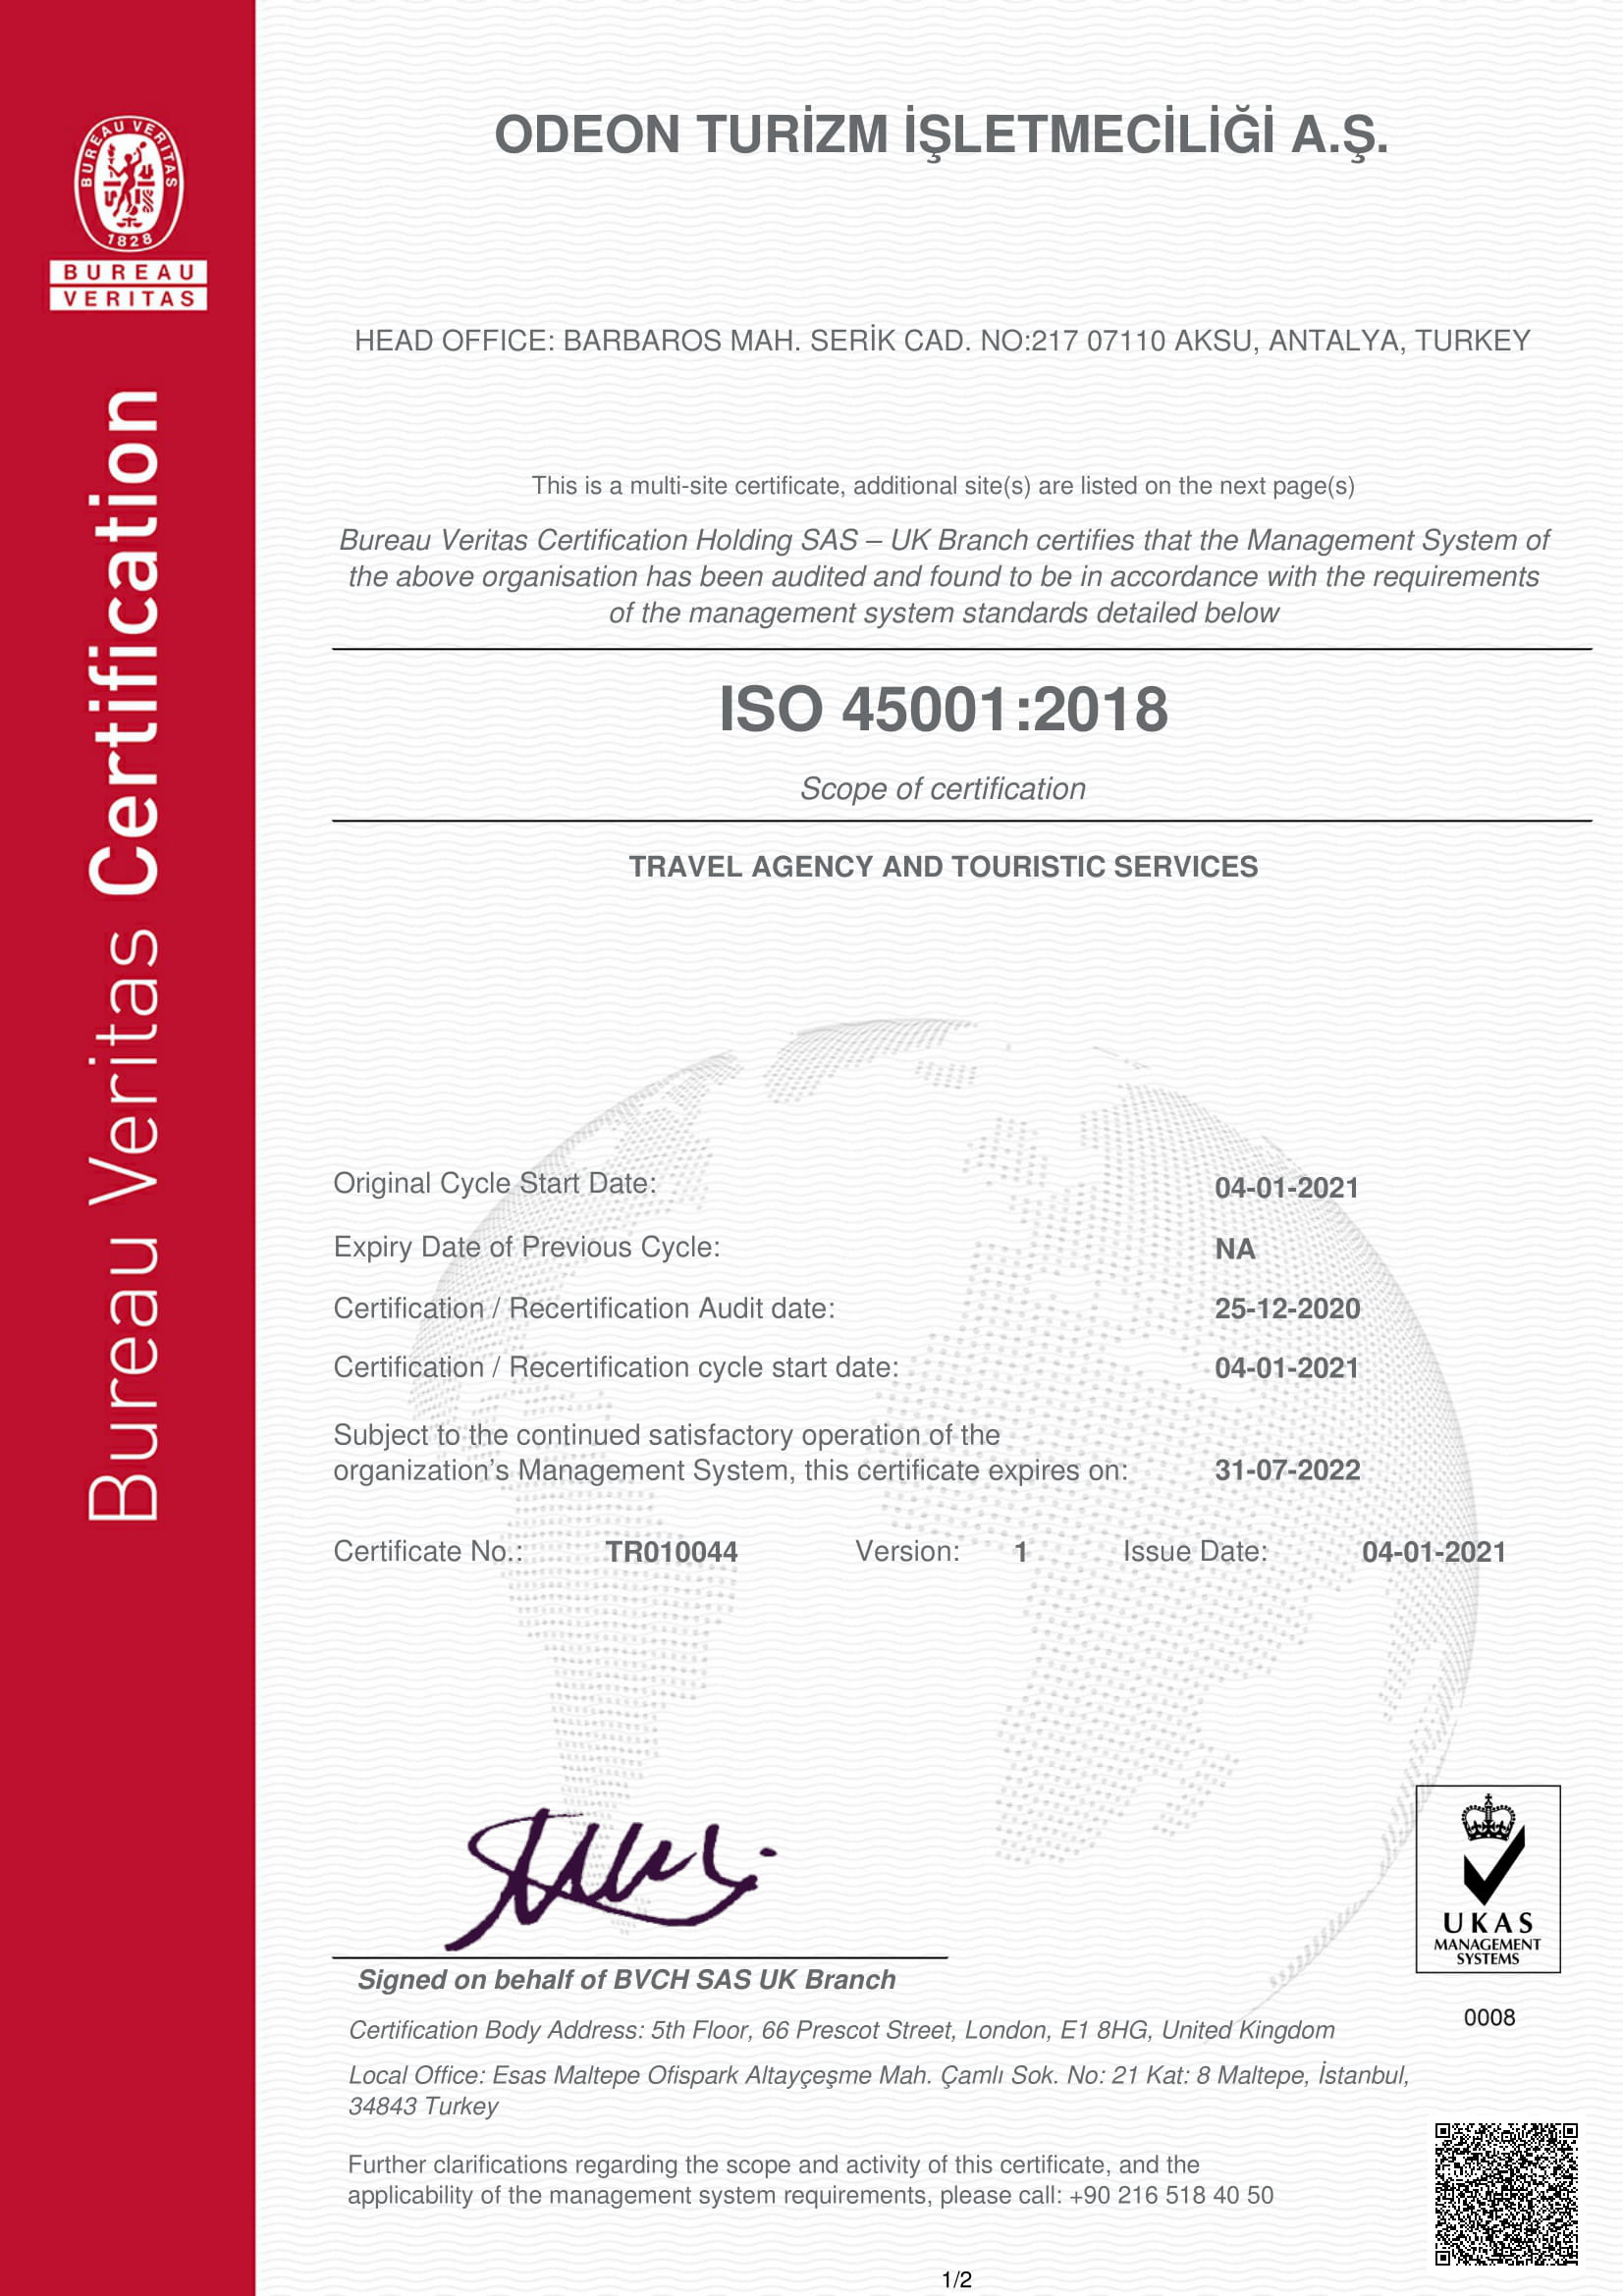 ISO 45001:2018 Occupational Health and Safety Management System Certificate